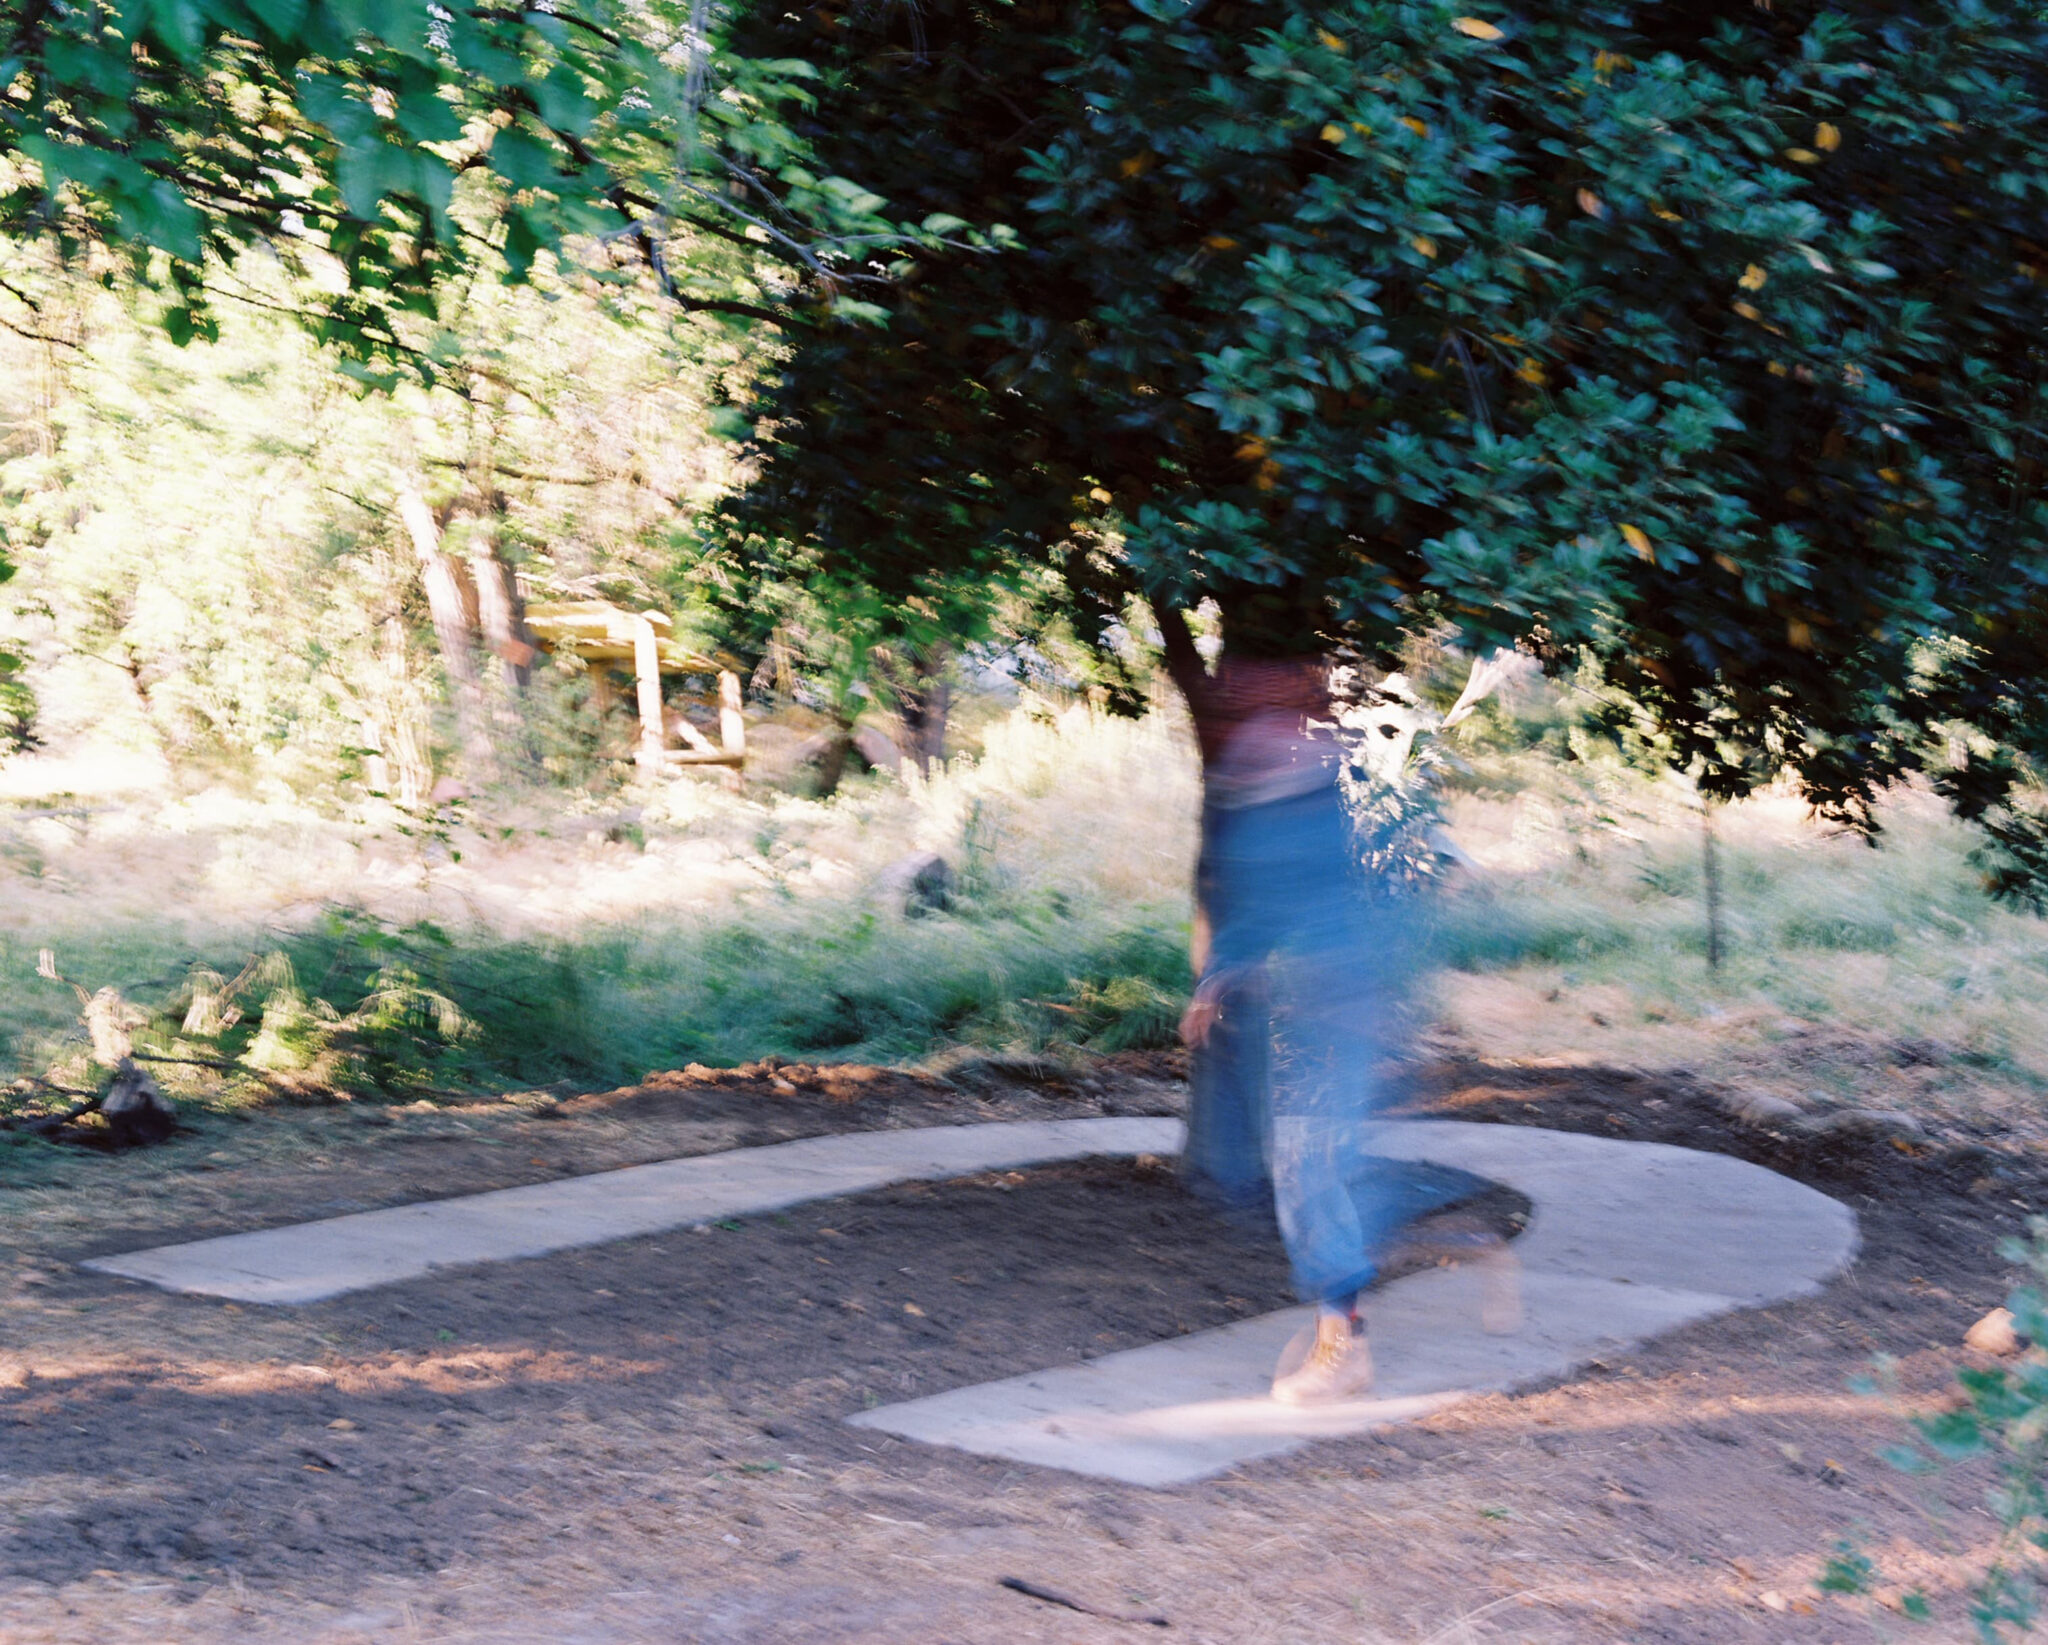 A photograph depicting the installation and performance of Daphne by Zeina Baltagi. Daphne is a bay tree in the middle of a paved cul-de-sac sidewalk in a cleared out dirt patch of a wooded area. The images include Zeina Baltagi in motion, walking on the sidewalk. She is wearing blue Lee Can't Bust Em 1940s Union cover-alls, tan work boots, and a red and white patterned keffiyeh scarf around her neck which covers her nose and mouth.